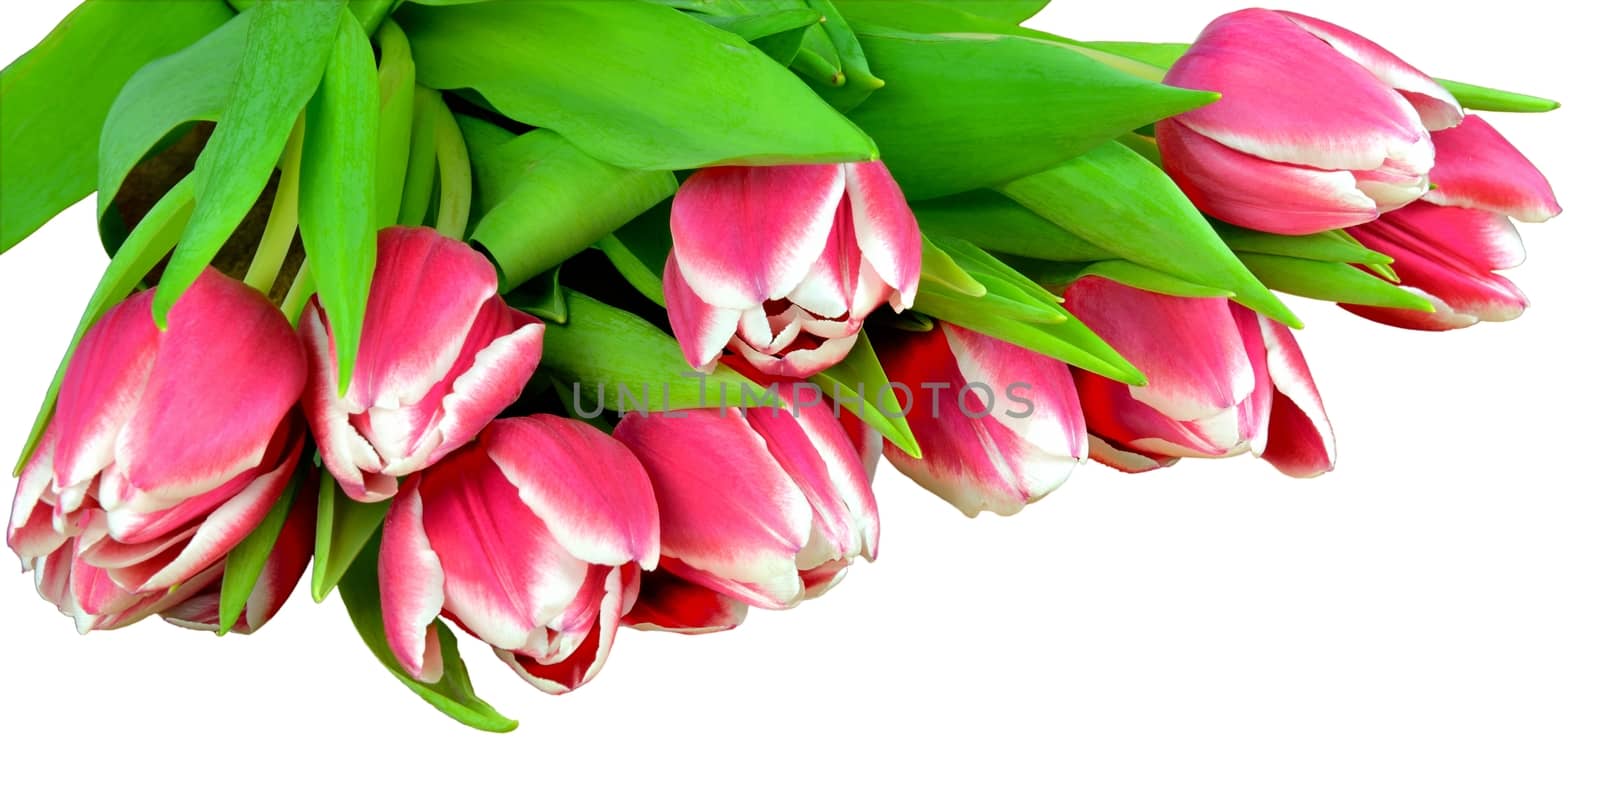 A bouquet of fresh tulips